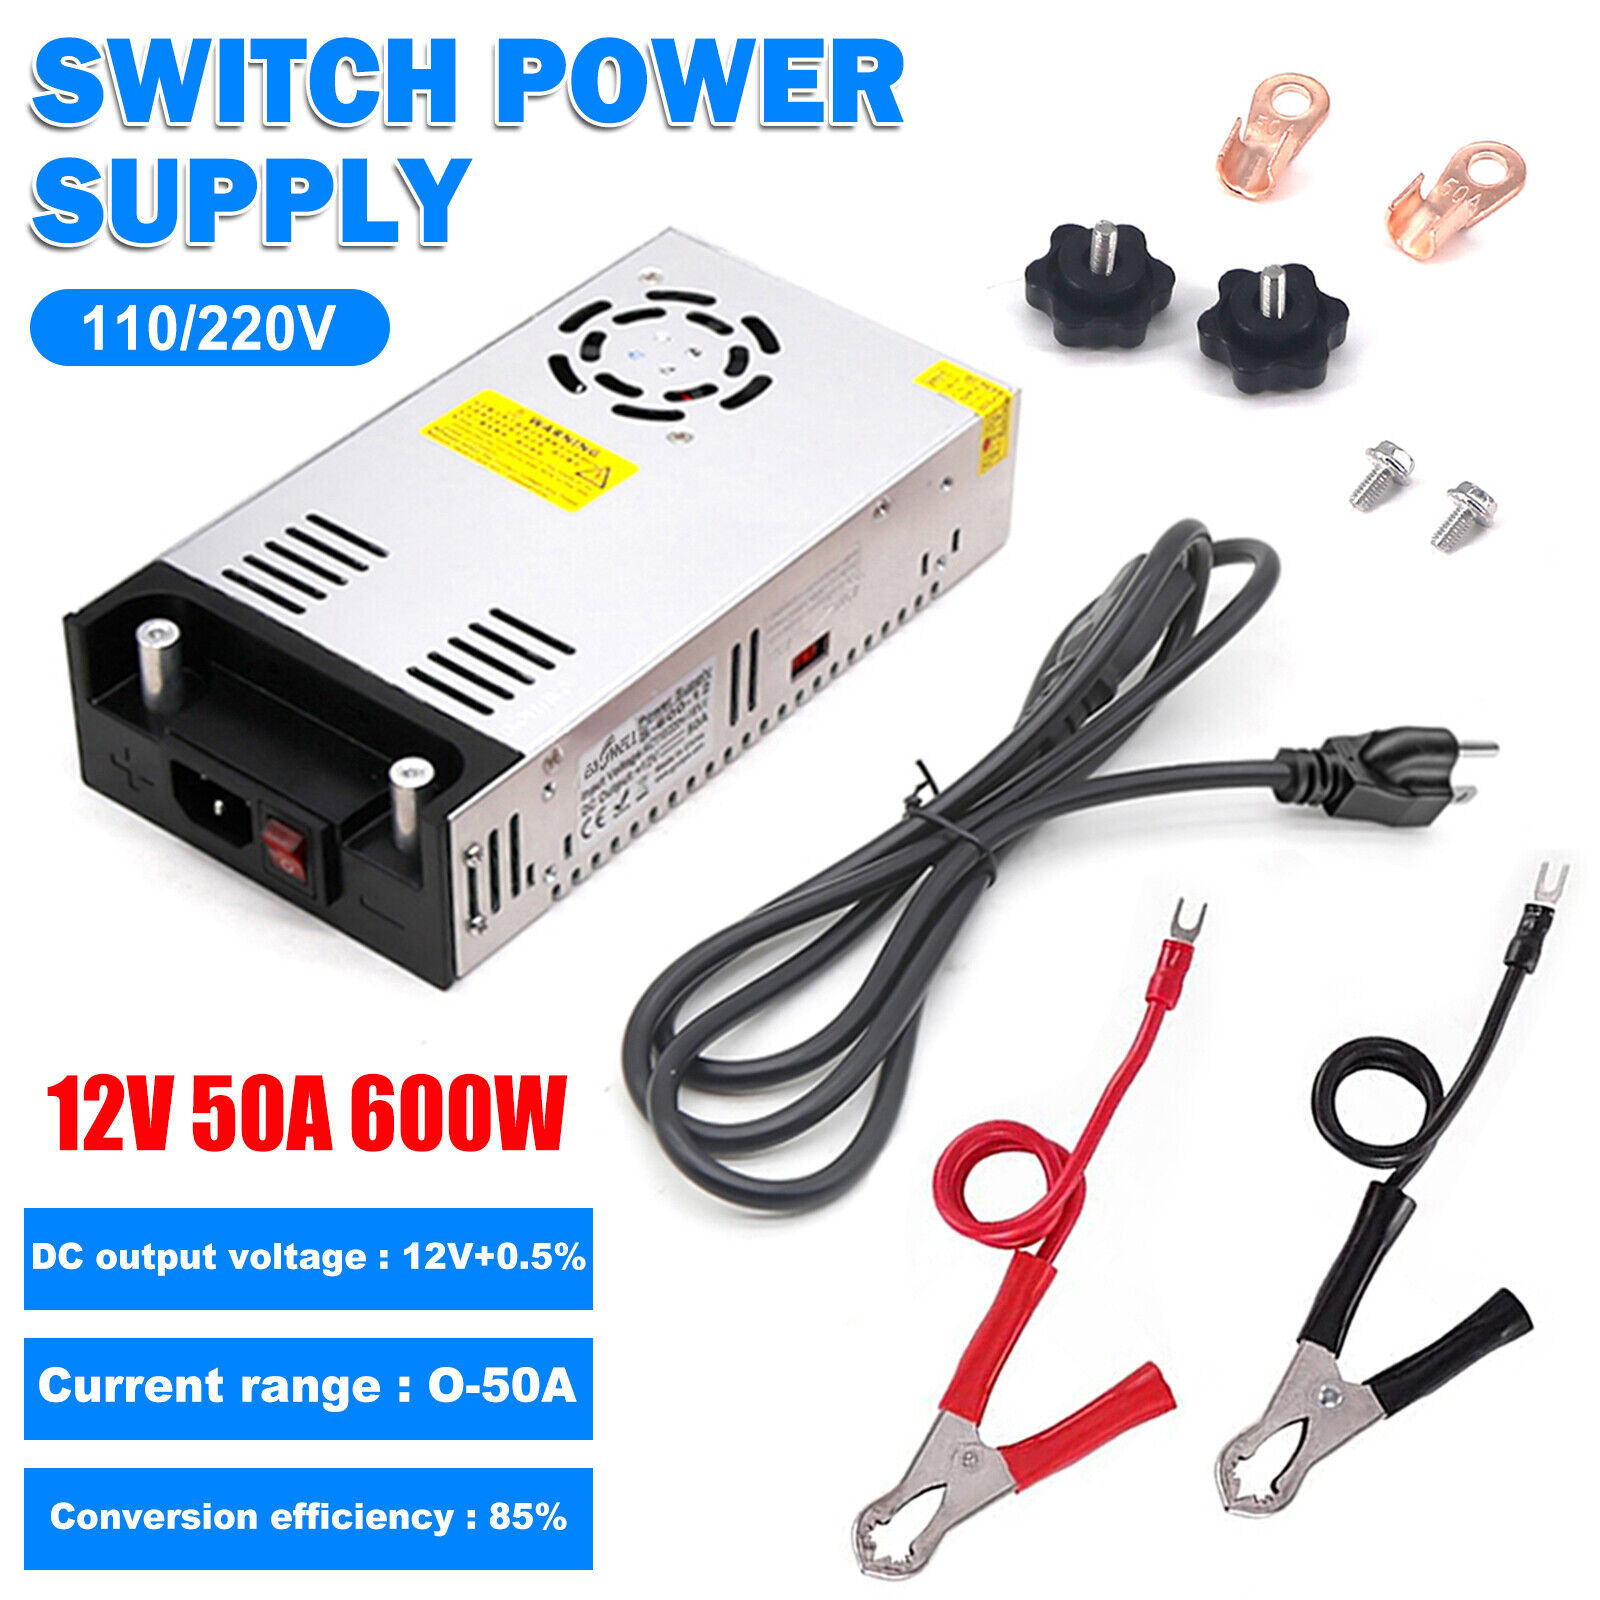 SMPS 110V AC to 12V DC Converter Power Supply Adapter Switch Transformer Max 50A